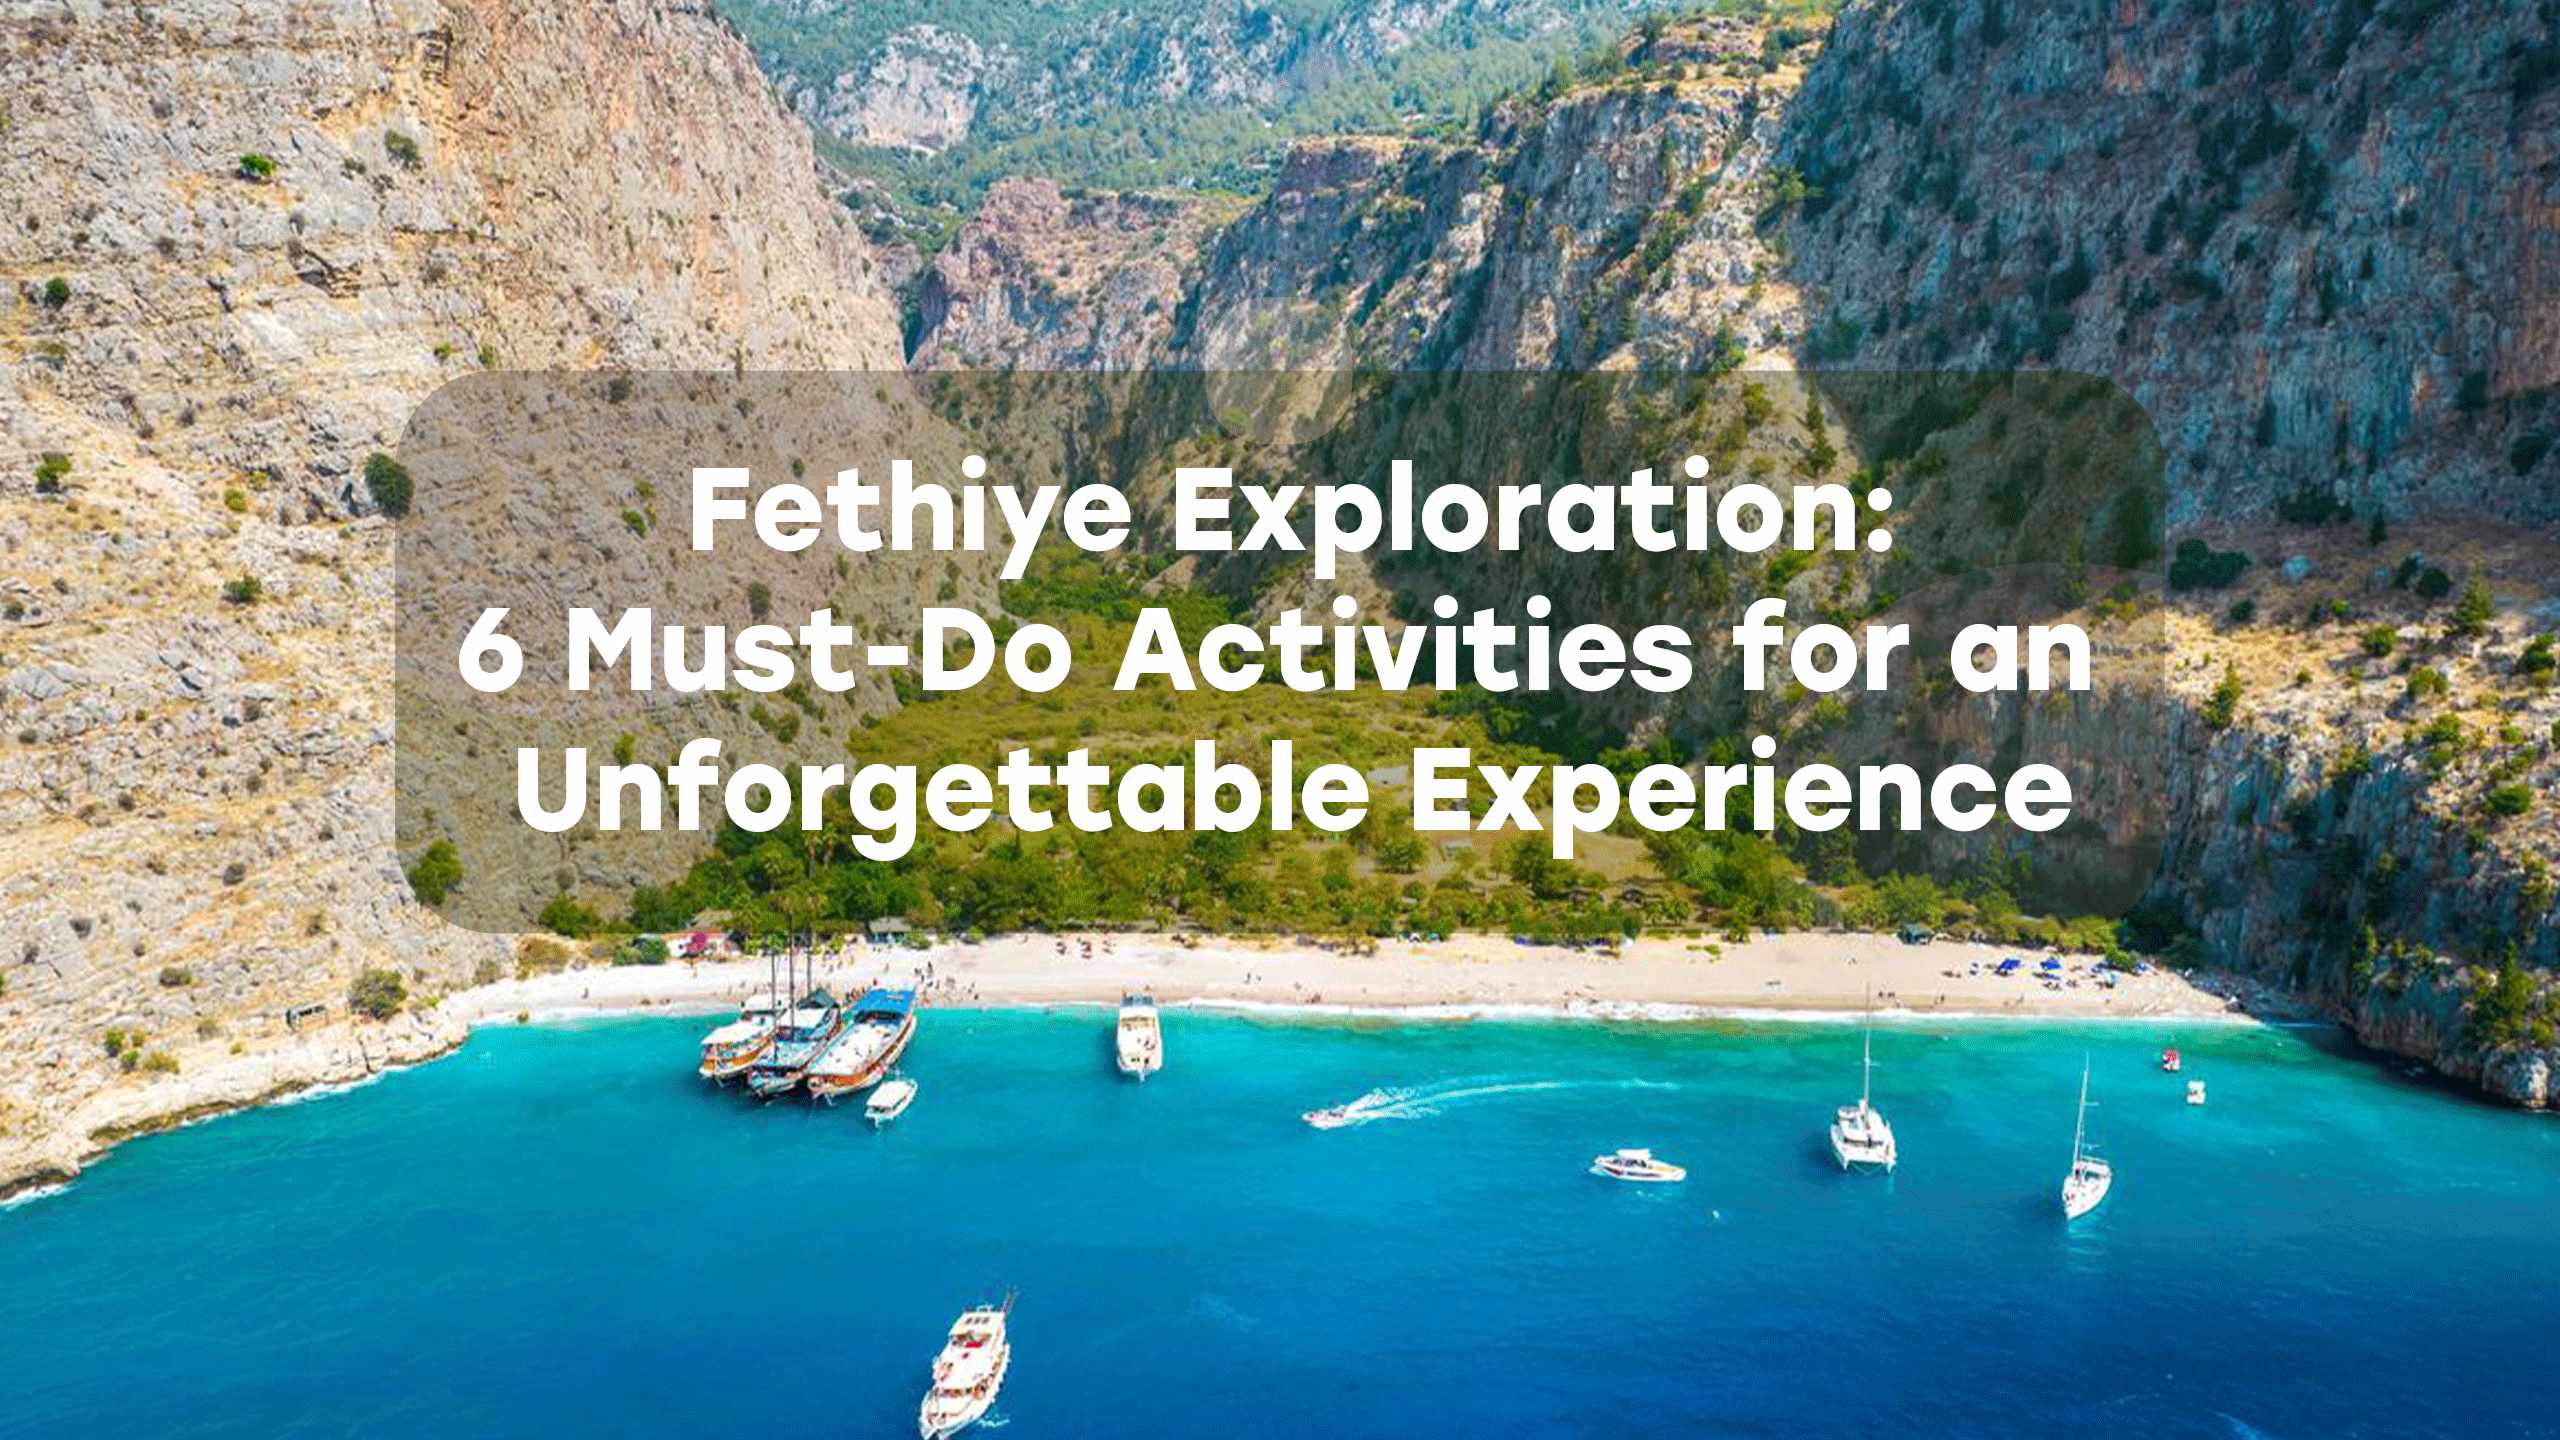 Fethiye Exploration: 6 Must-Do Activities for an Unforgettable Experience Everytours Travel Antalya